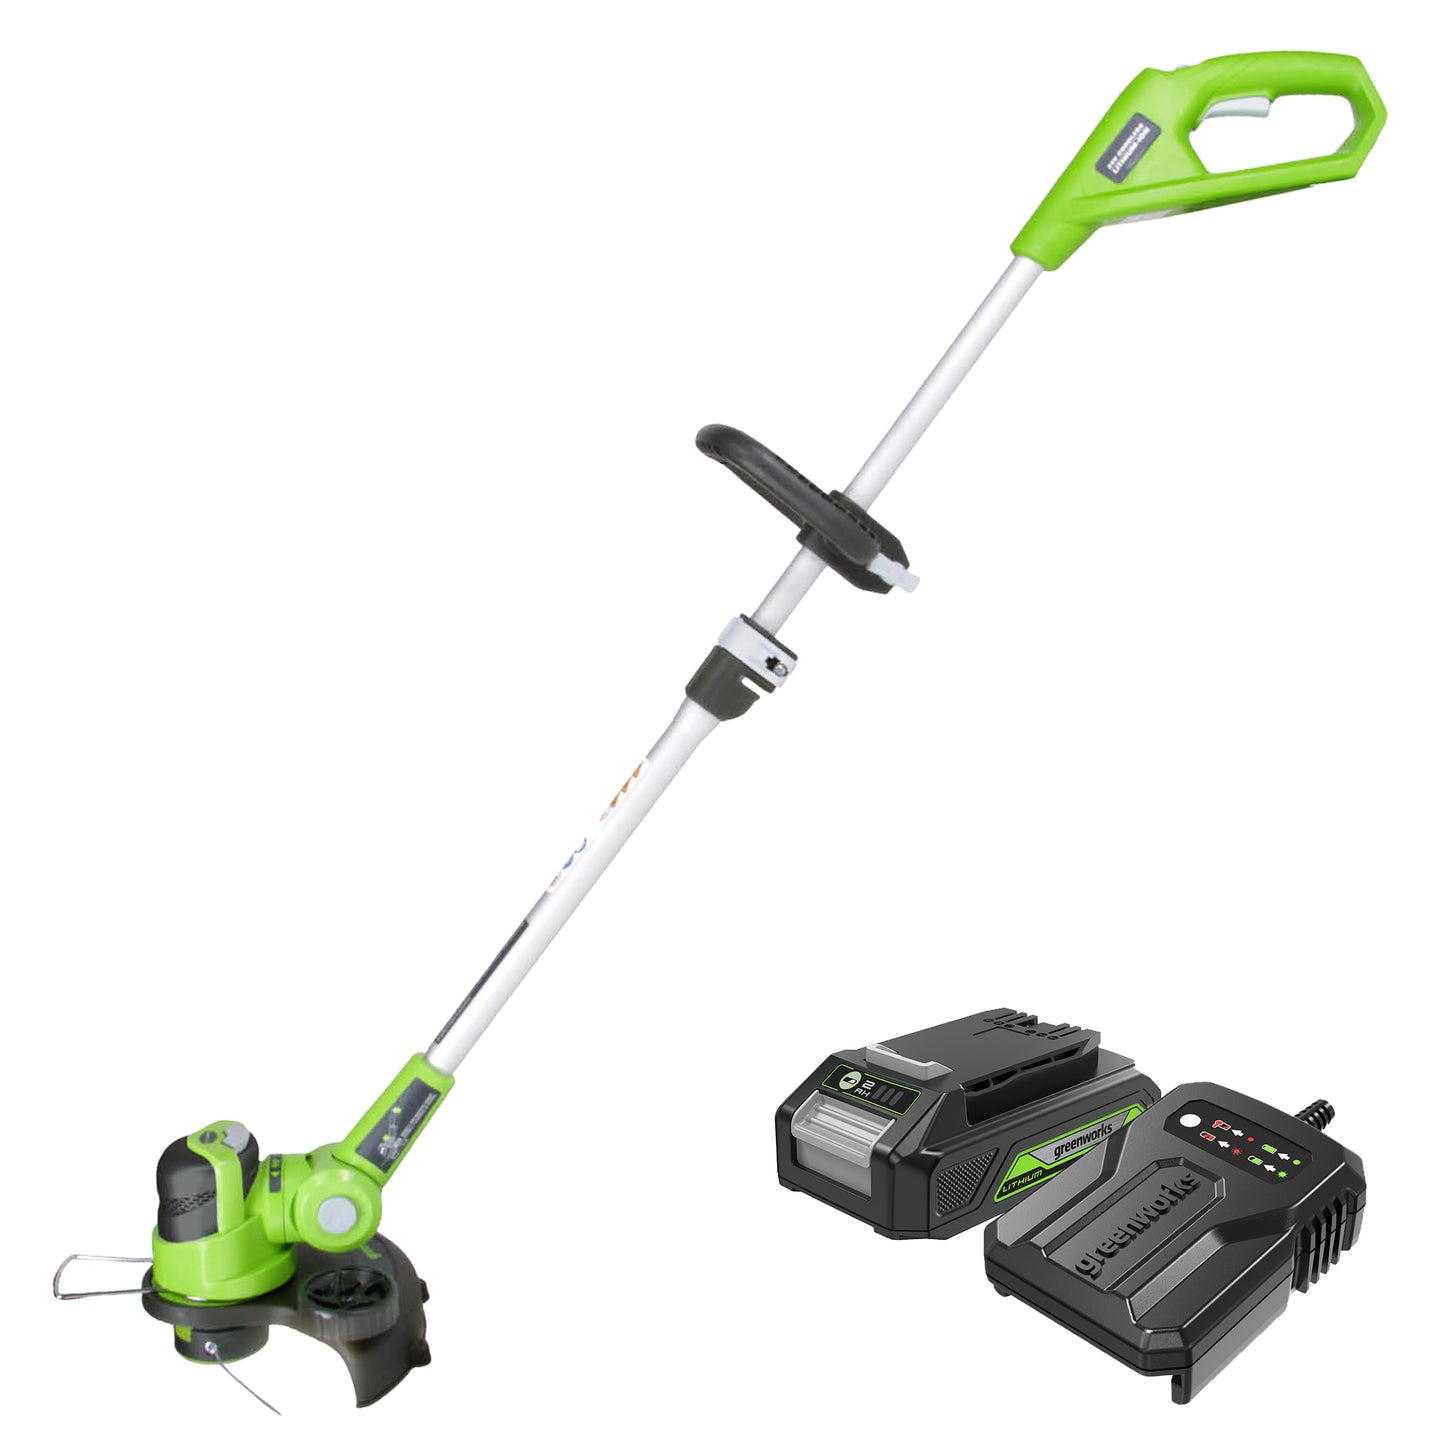 Black & Decker 20V Weed Trimmer & Edger with battery and line for